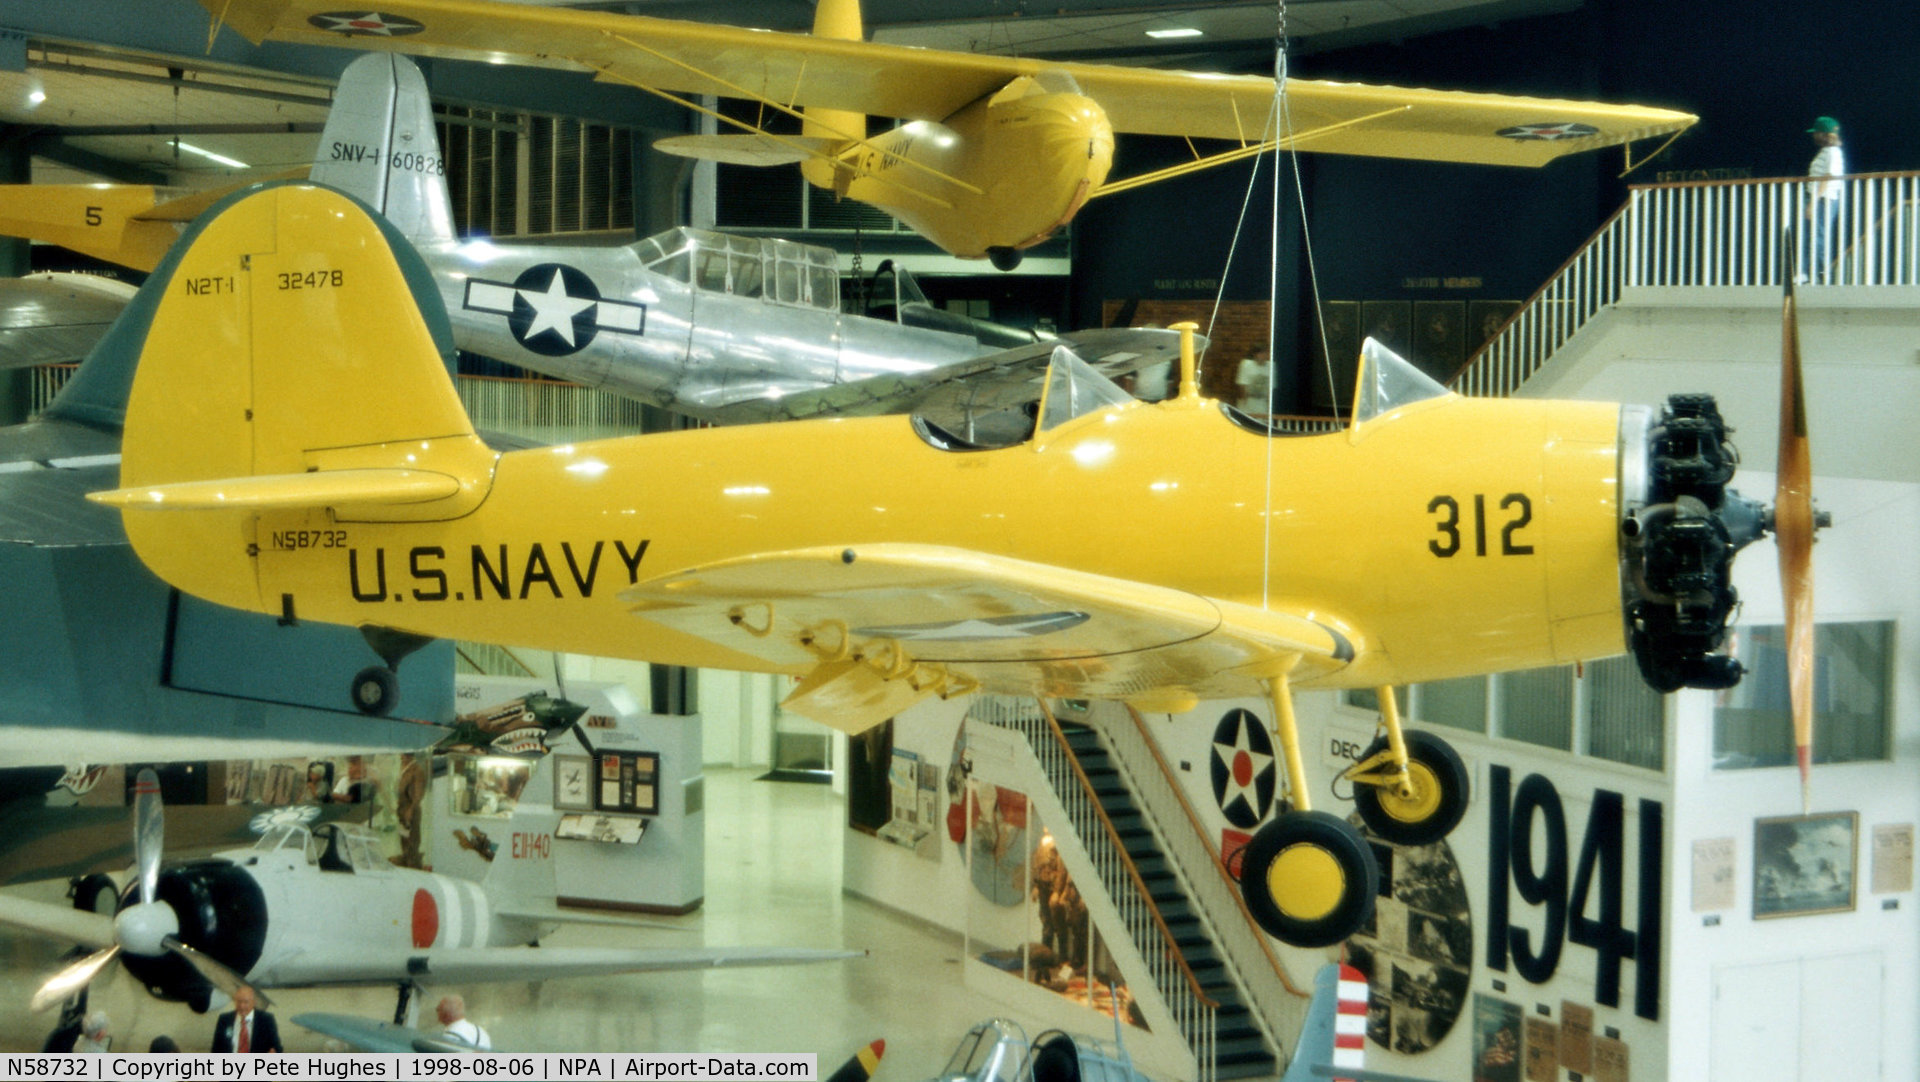 N58732, 1943 Timm N2T-1 C/N 216, at Naval Museum Pensacola, picture scanned from slide